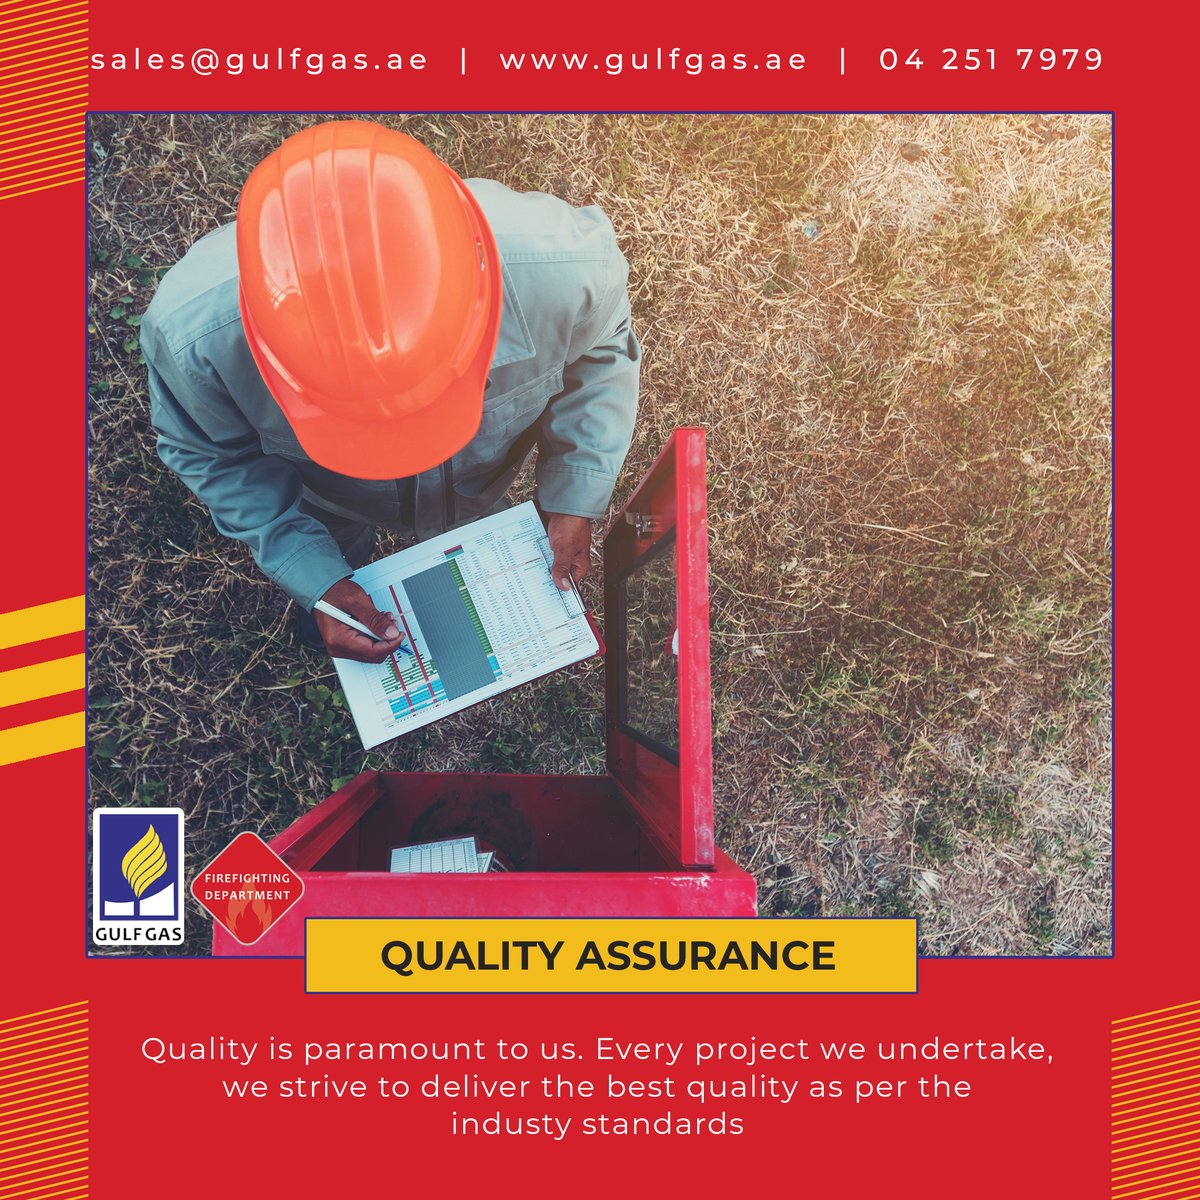 Quality is paramount to us. We strive to deliver the best in every project we undertake.

Call: 04 251 7979
Email: sales@gulfgas.ae
Visit: gulfgas.ae
#gulfgas #gassystem #installation #LPG #sustainability #cleanenergy #firefighting #firefightingsystem #pipelines